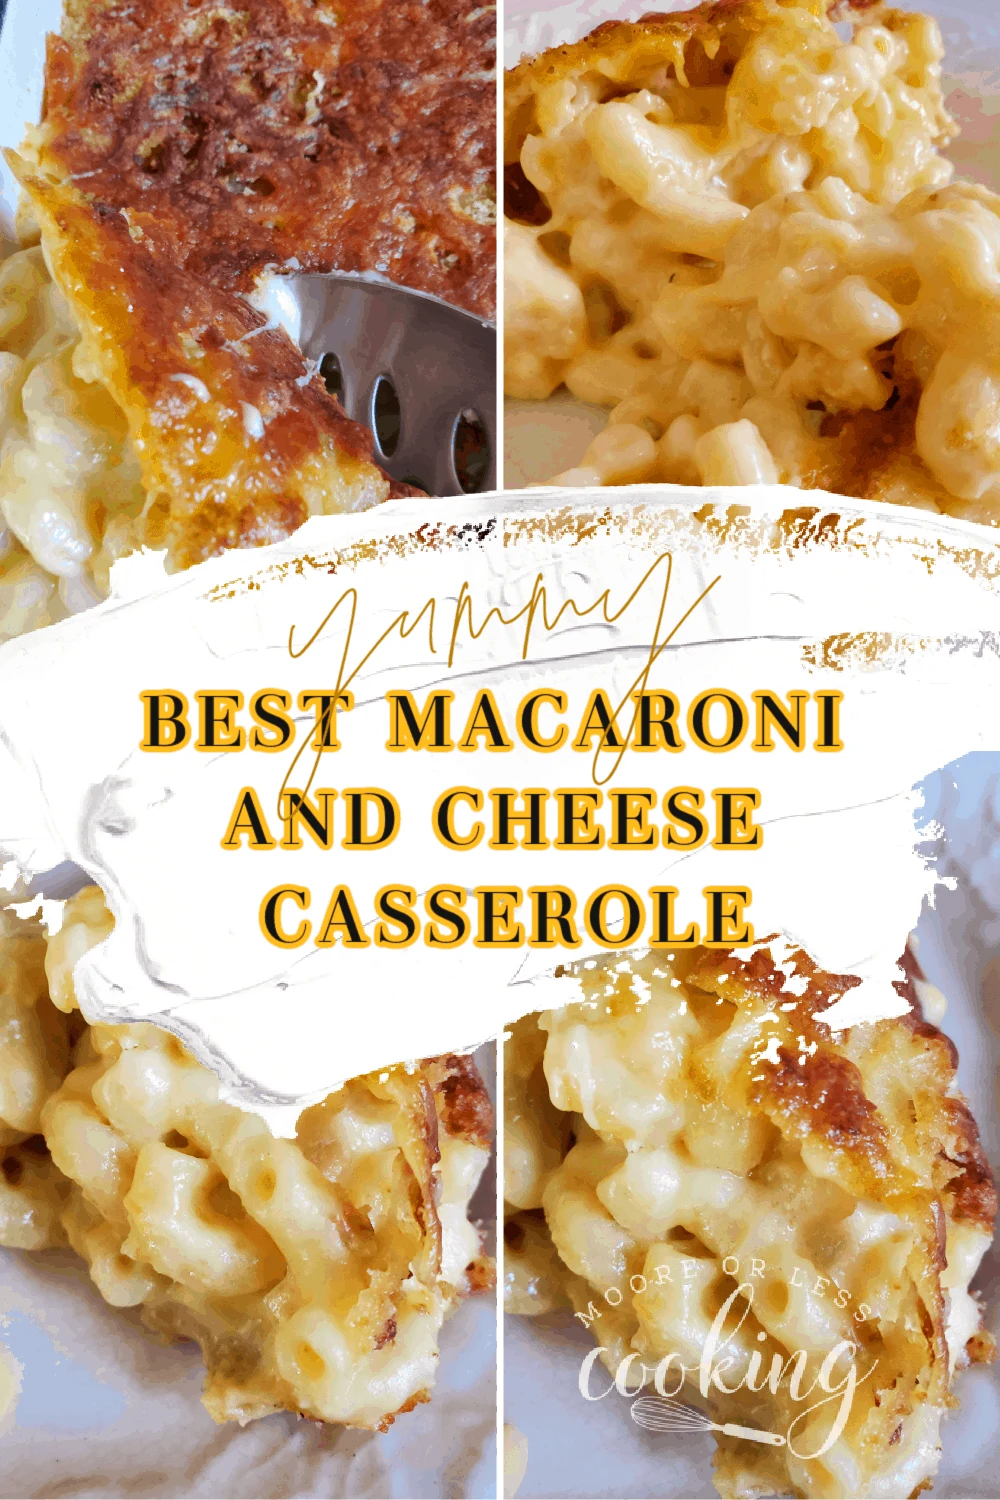 Enjoy a cheesy, delectable recipe that you can serve as a side dish or main entree for the family. The Best Macaroni and Cheese Casserole contains assorted cheeses, breadcrumbs, and additional ingredients to create the perfect creamy texture with a bubbly, crisp topping. It is a family favorite that everyone can enjoy. via @Mooreorlesscook